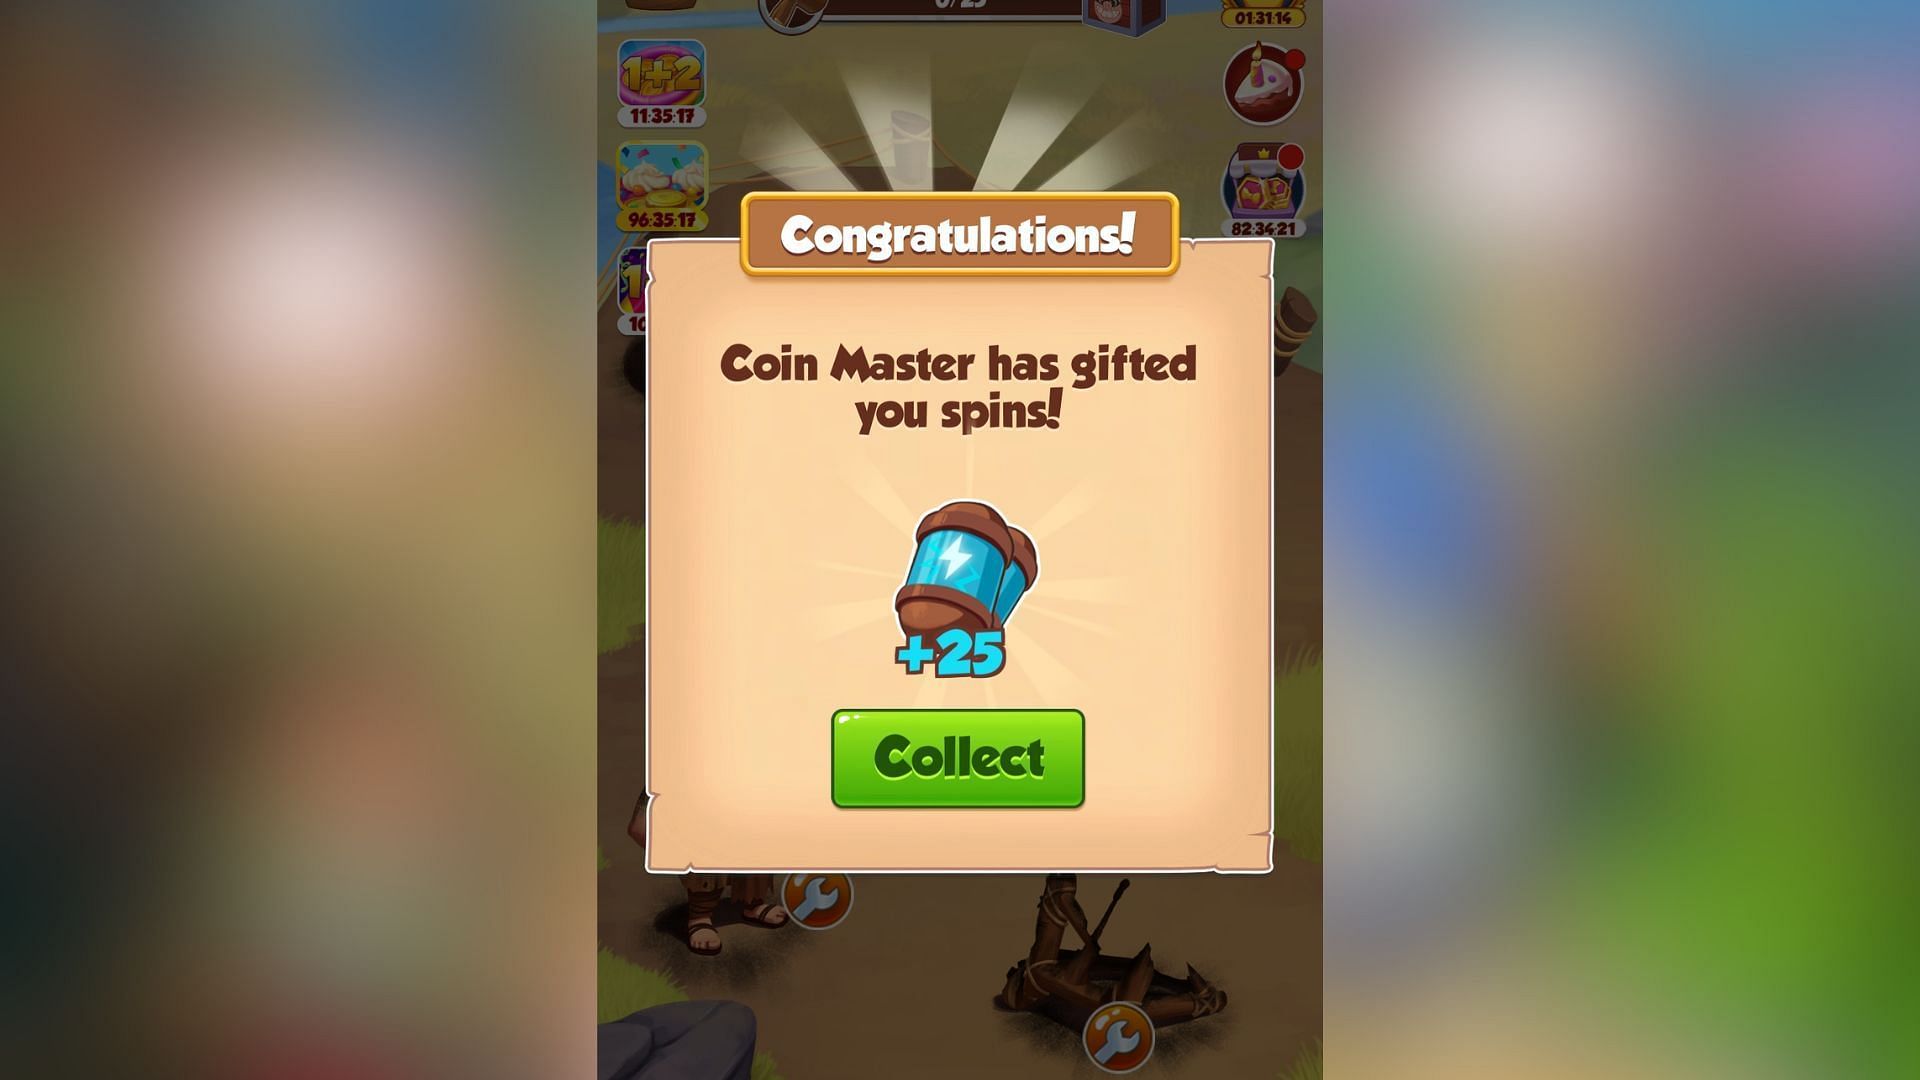 Claim the free rewards by clicking the Collect button. (Image via Moon Active)